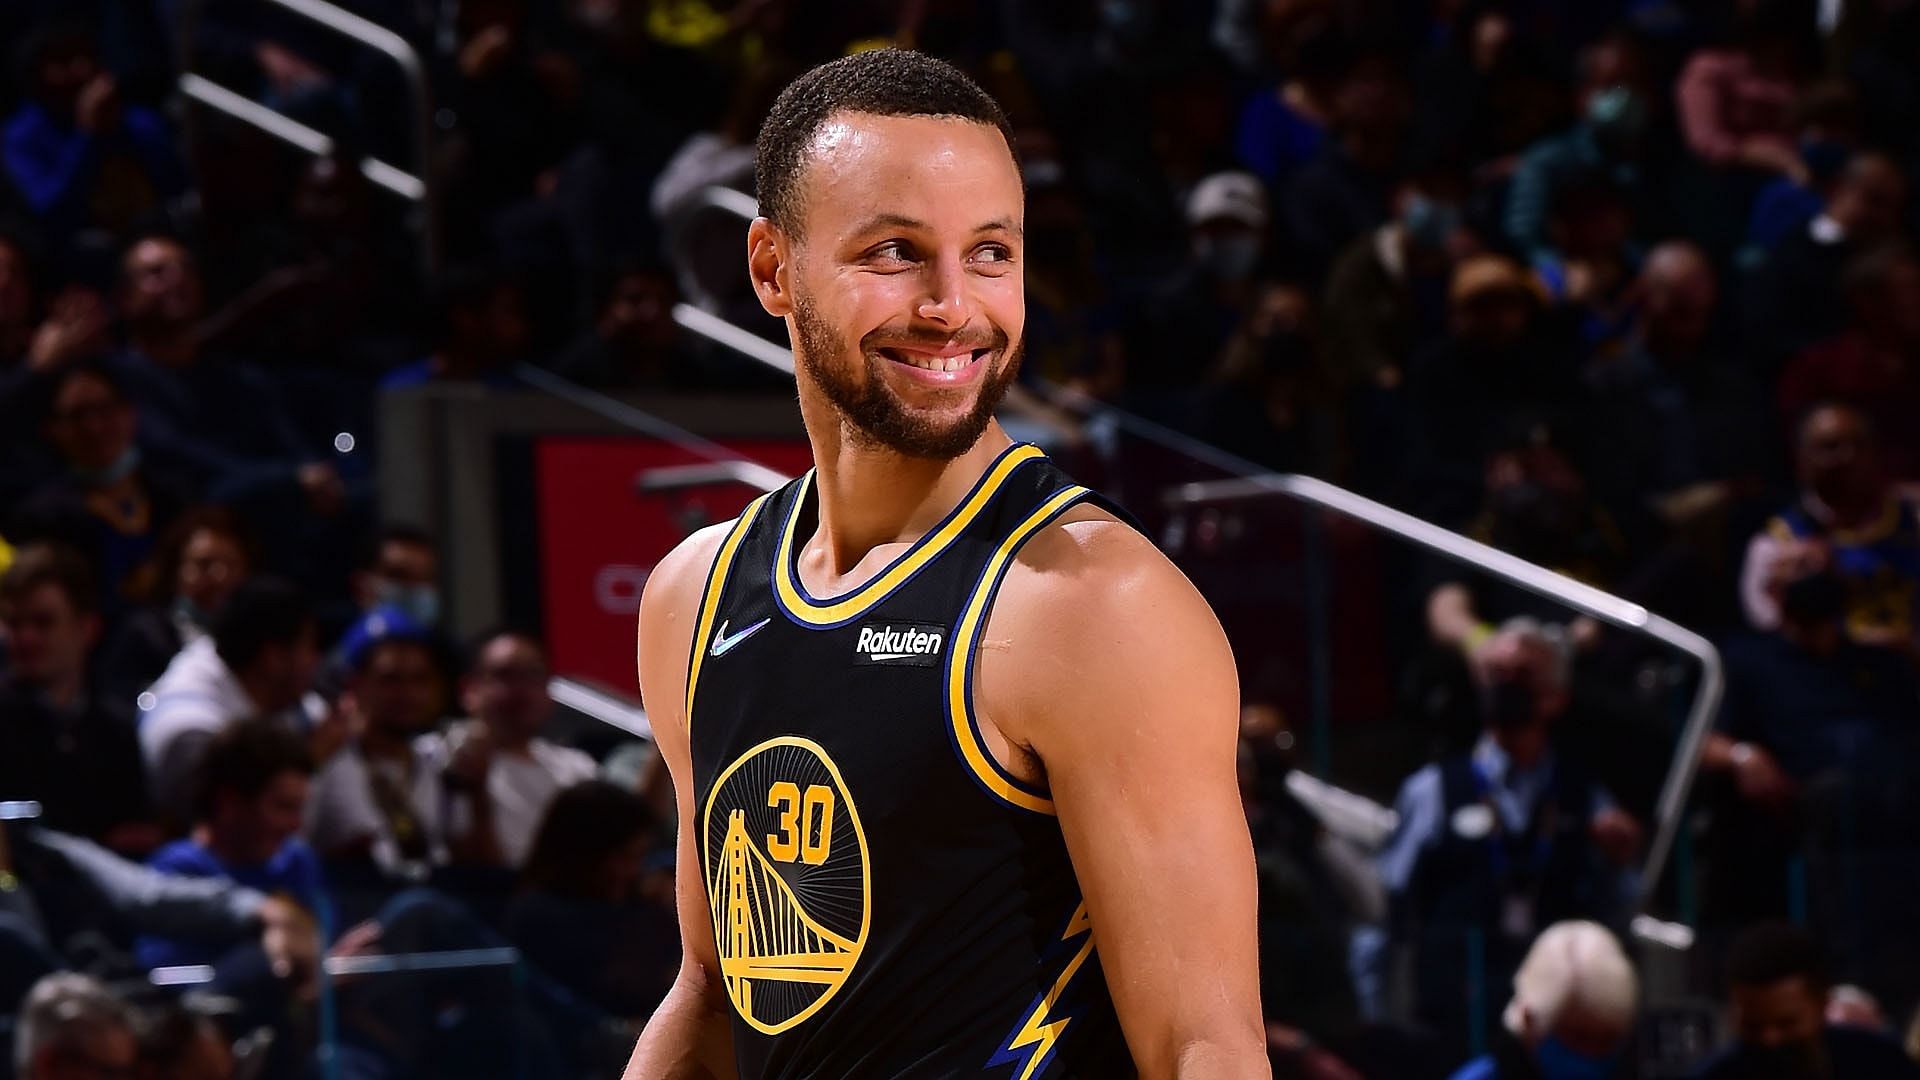 Steph Curry of the Golden State Warriors (Photo: NBA.com)